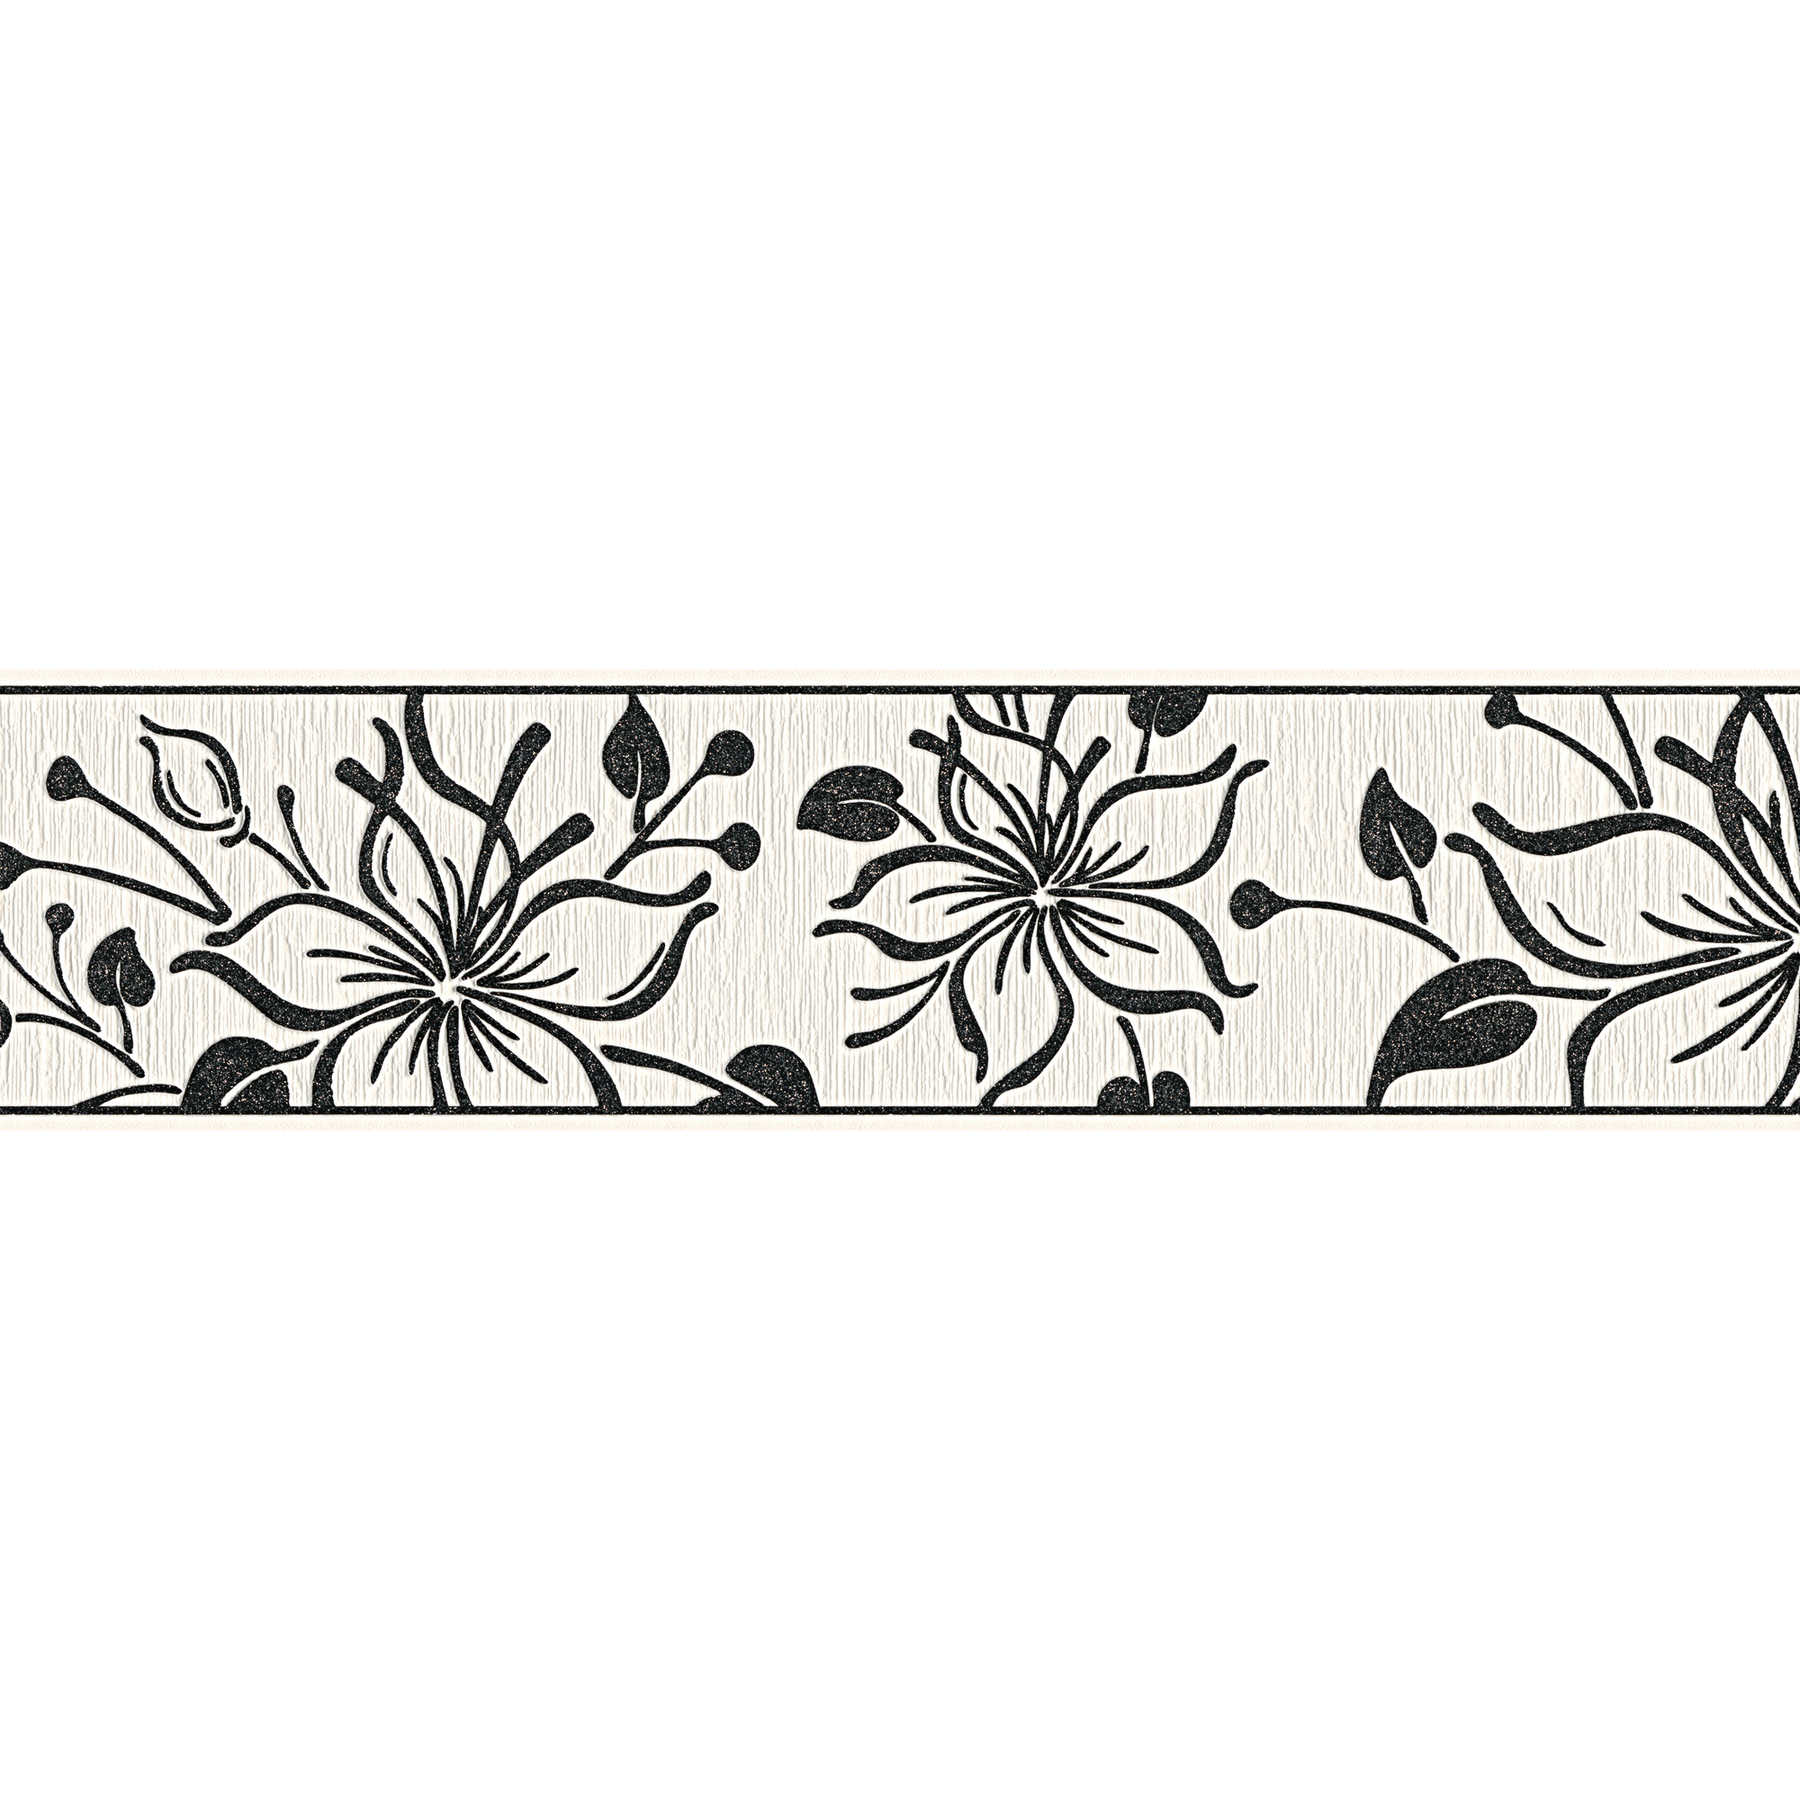         Self-adhesive wallpaper border with floral pattern - black, white
    